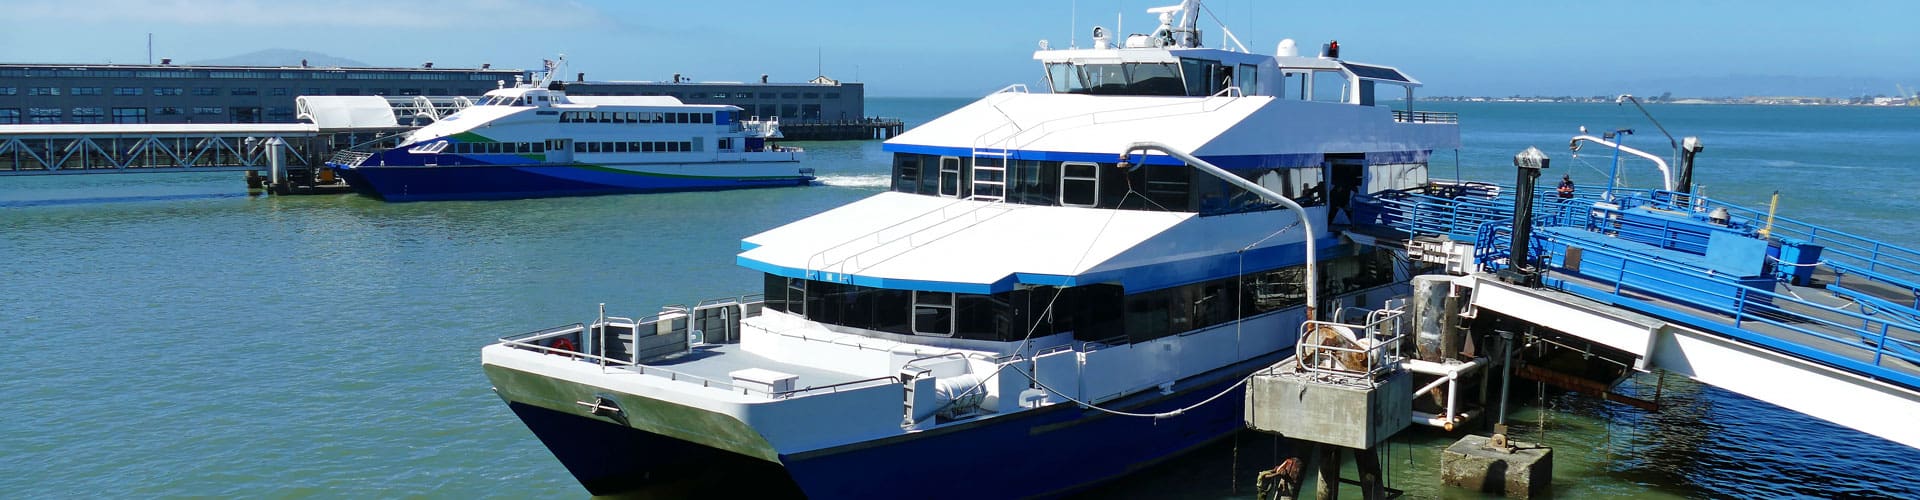 10 Questions to ask before boarding a commercial boat